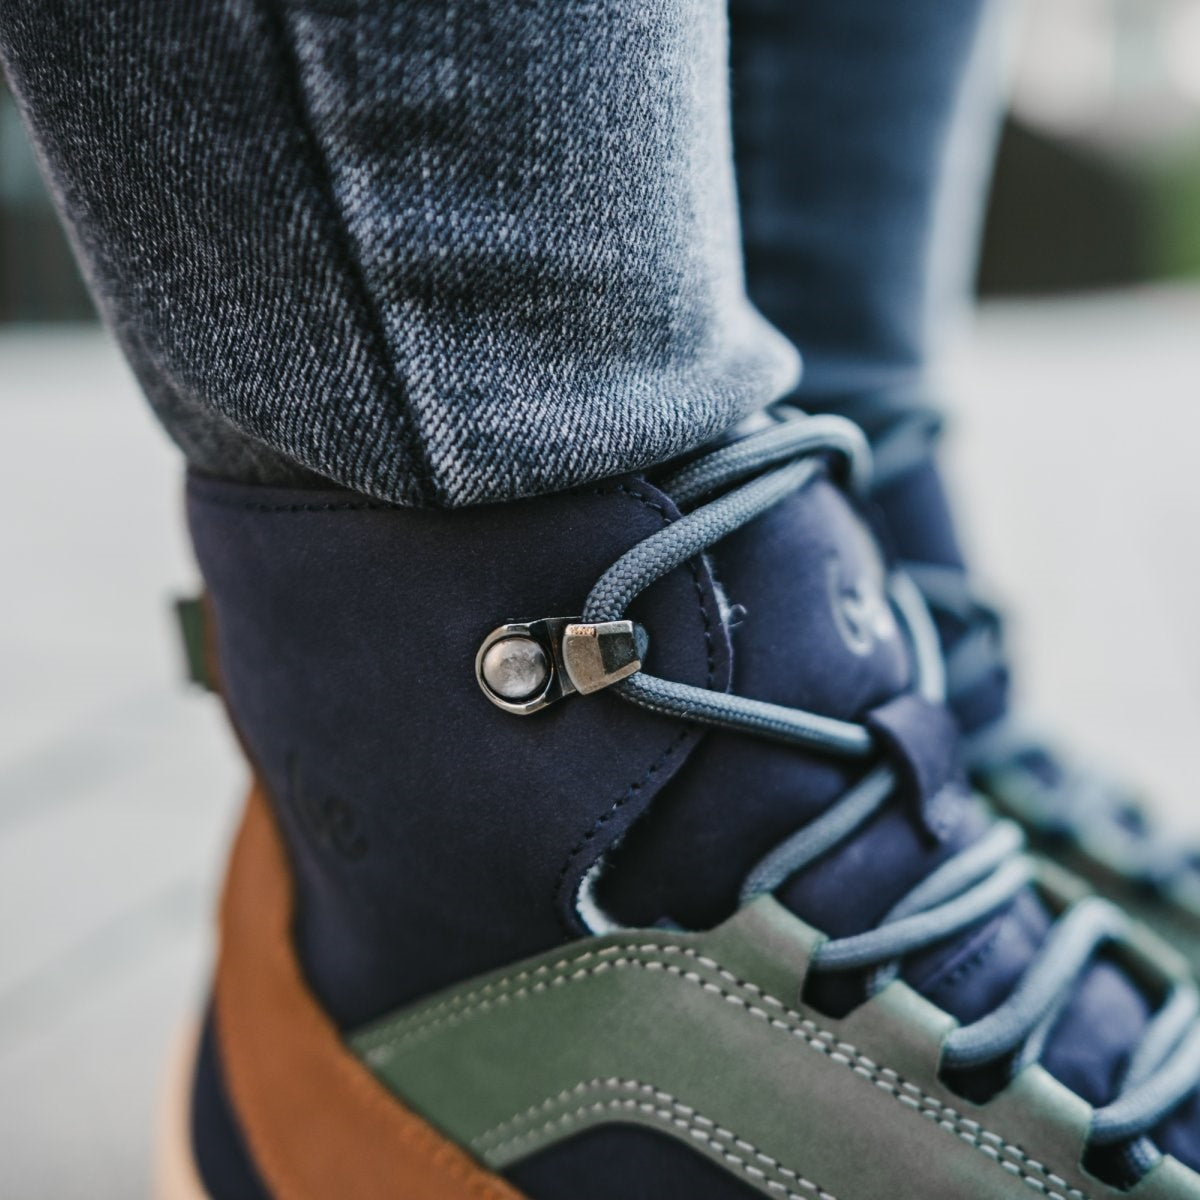 A photo of Be Lenka York ankle lace up boots made from nubuck leather and tan rubber soles. The boots have a navy base color with brown wrapped around the edge of the shoe up the back of the ankle, green angled arch detailing on either side of the laces, and grey laces. Both boots are shown from the right side with a close up view of the right boot ankle lacing. They are on a woman's feet who is standing on a paved sidewalk, while wearing blue skinny jeans tucked into the boots. #color_navy-brown-beige